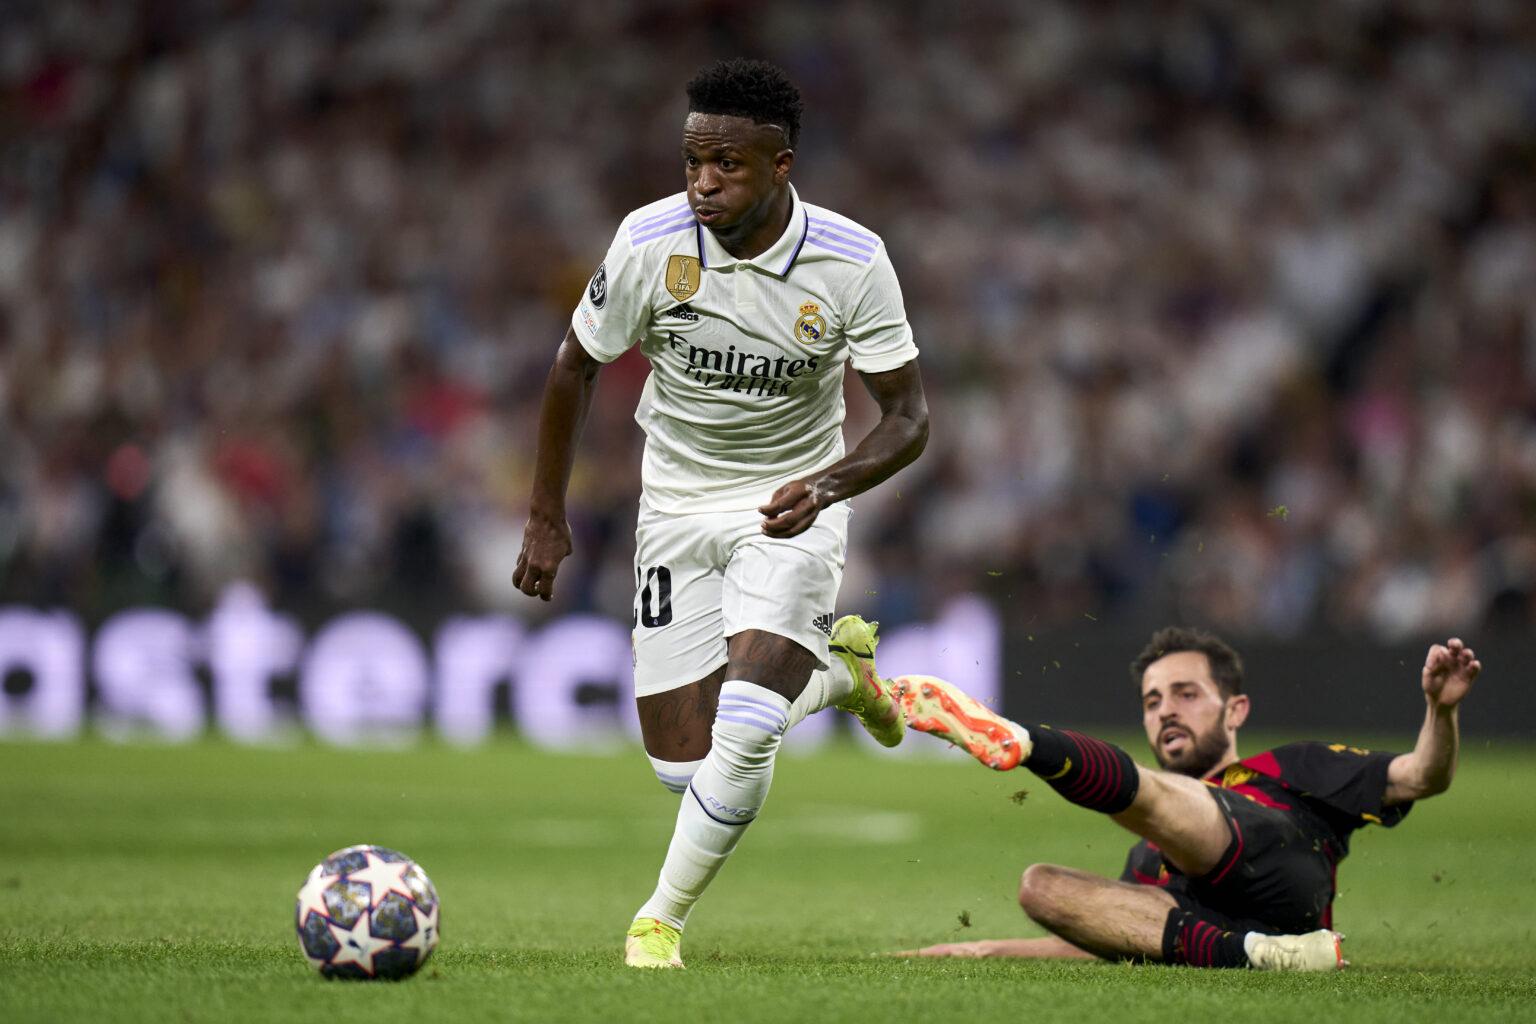 MADRID, SPAIN - MAY 09: Vinicius Junior of Real Madrid battle for the ball with Bernardo Silva of Manchester City FC during the UEFA Champions League semi-final first leg match between Real Madrid and Manchester City FC at Estadio Santiago Bernabeu on May 09, 2023 in Madrid, Spain. (Photo by Diego Souto/Quality Sport Images/Getty Images)